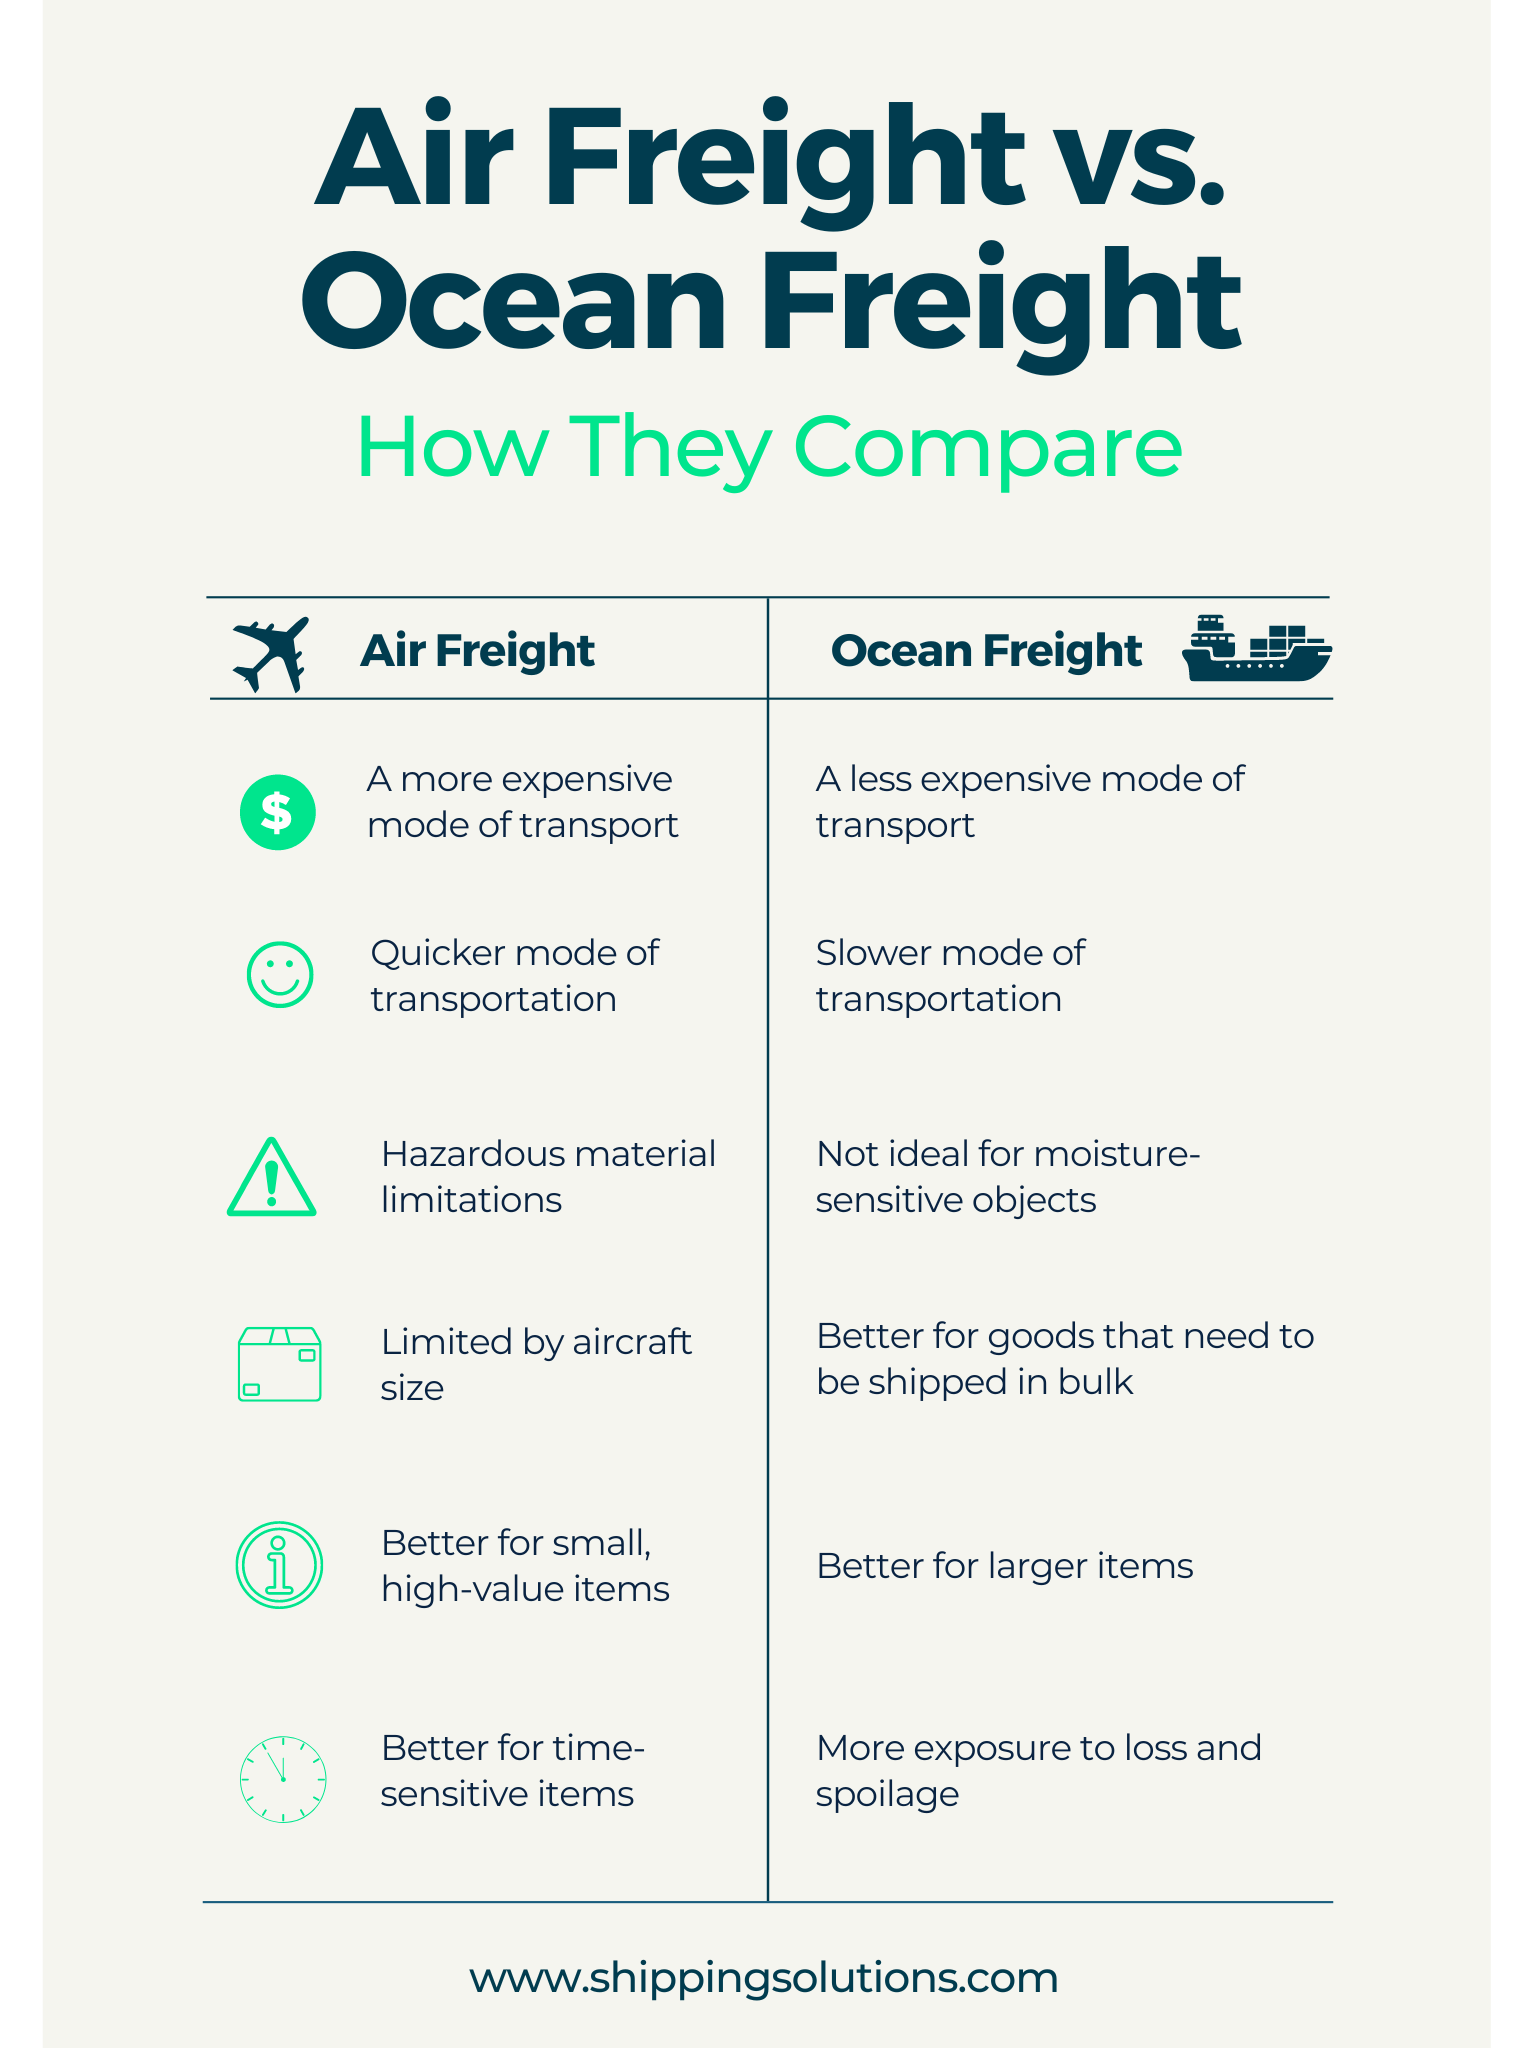 Air Freight vs. Ocean Freight: How They Compare